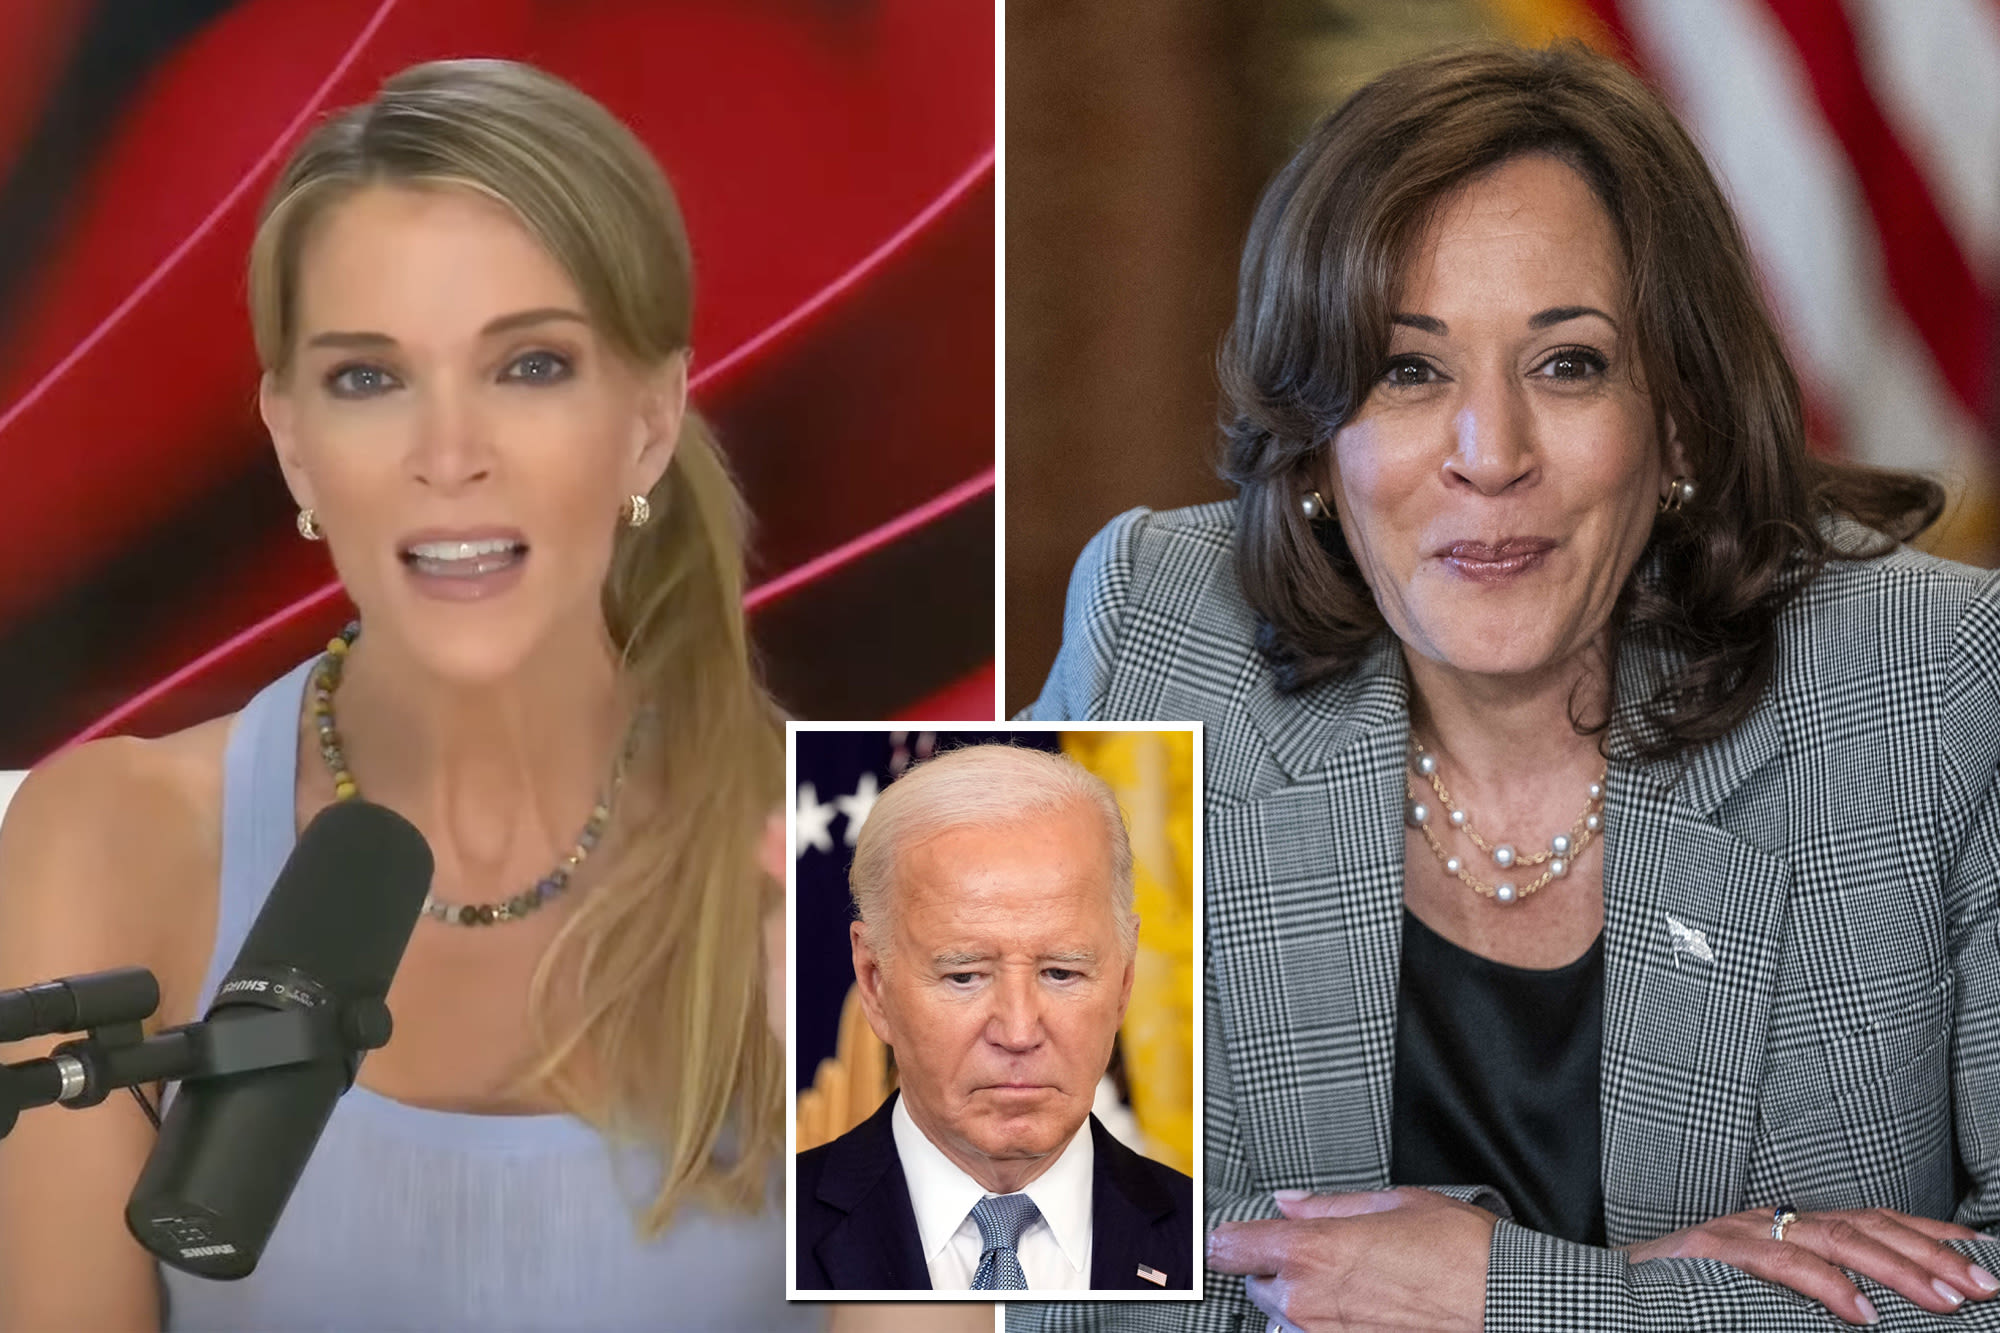 Megyn Kelly on Kamala Harris: ‘America is not going to elect this nimrod as its first female president’